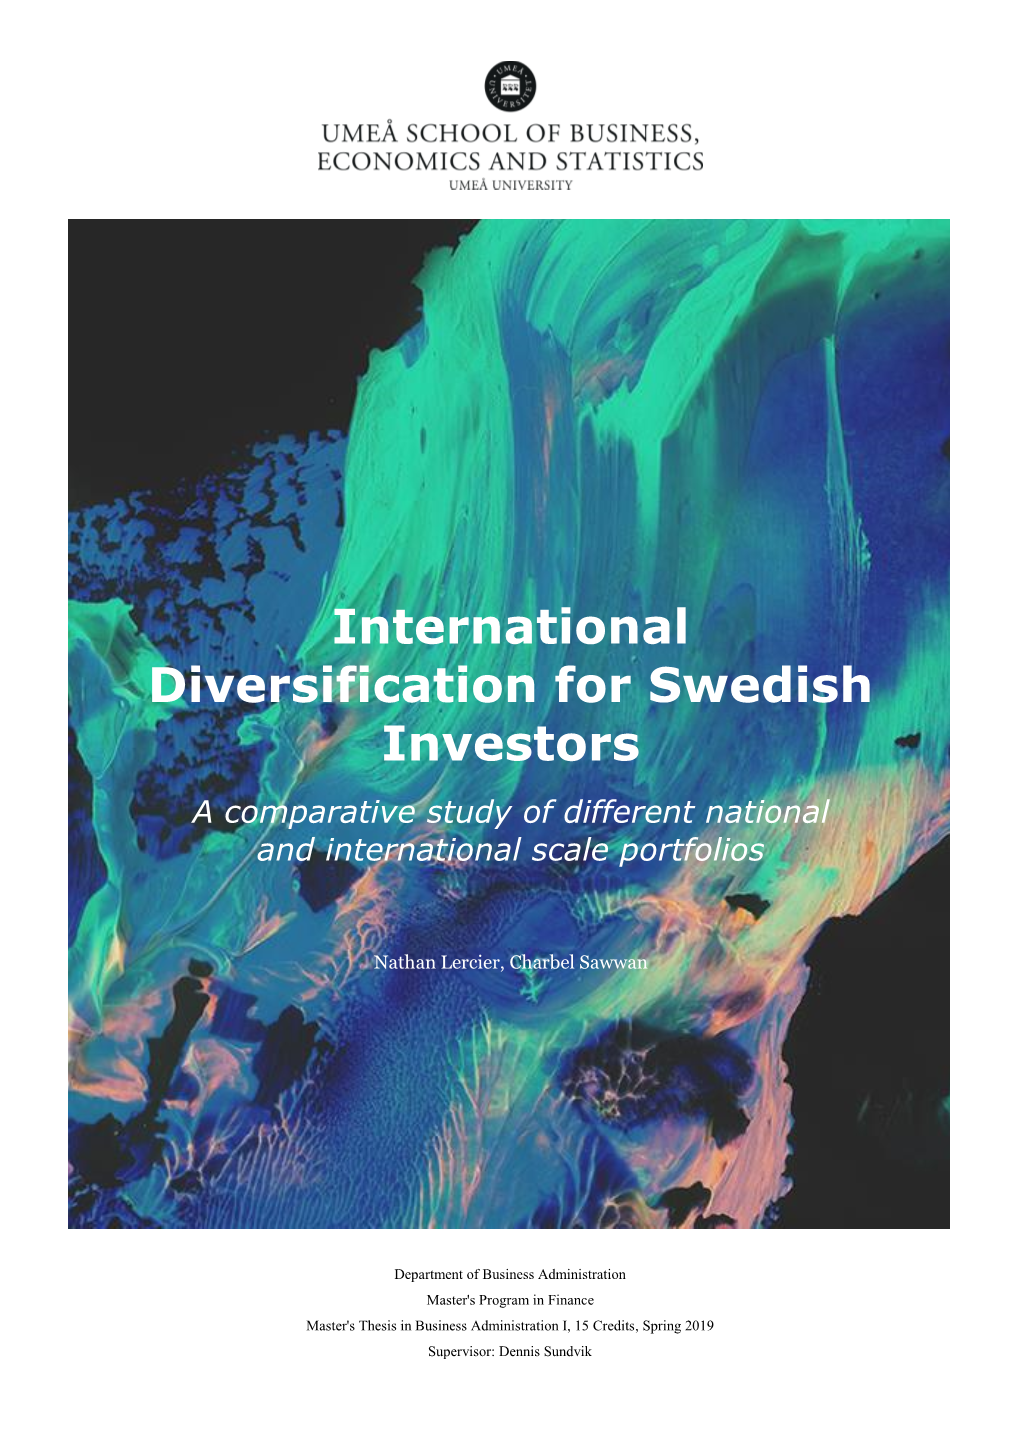 International Diversification for Swedish Investors a Comparative Study of Different National and International Scale Portfolios